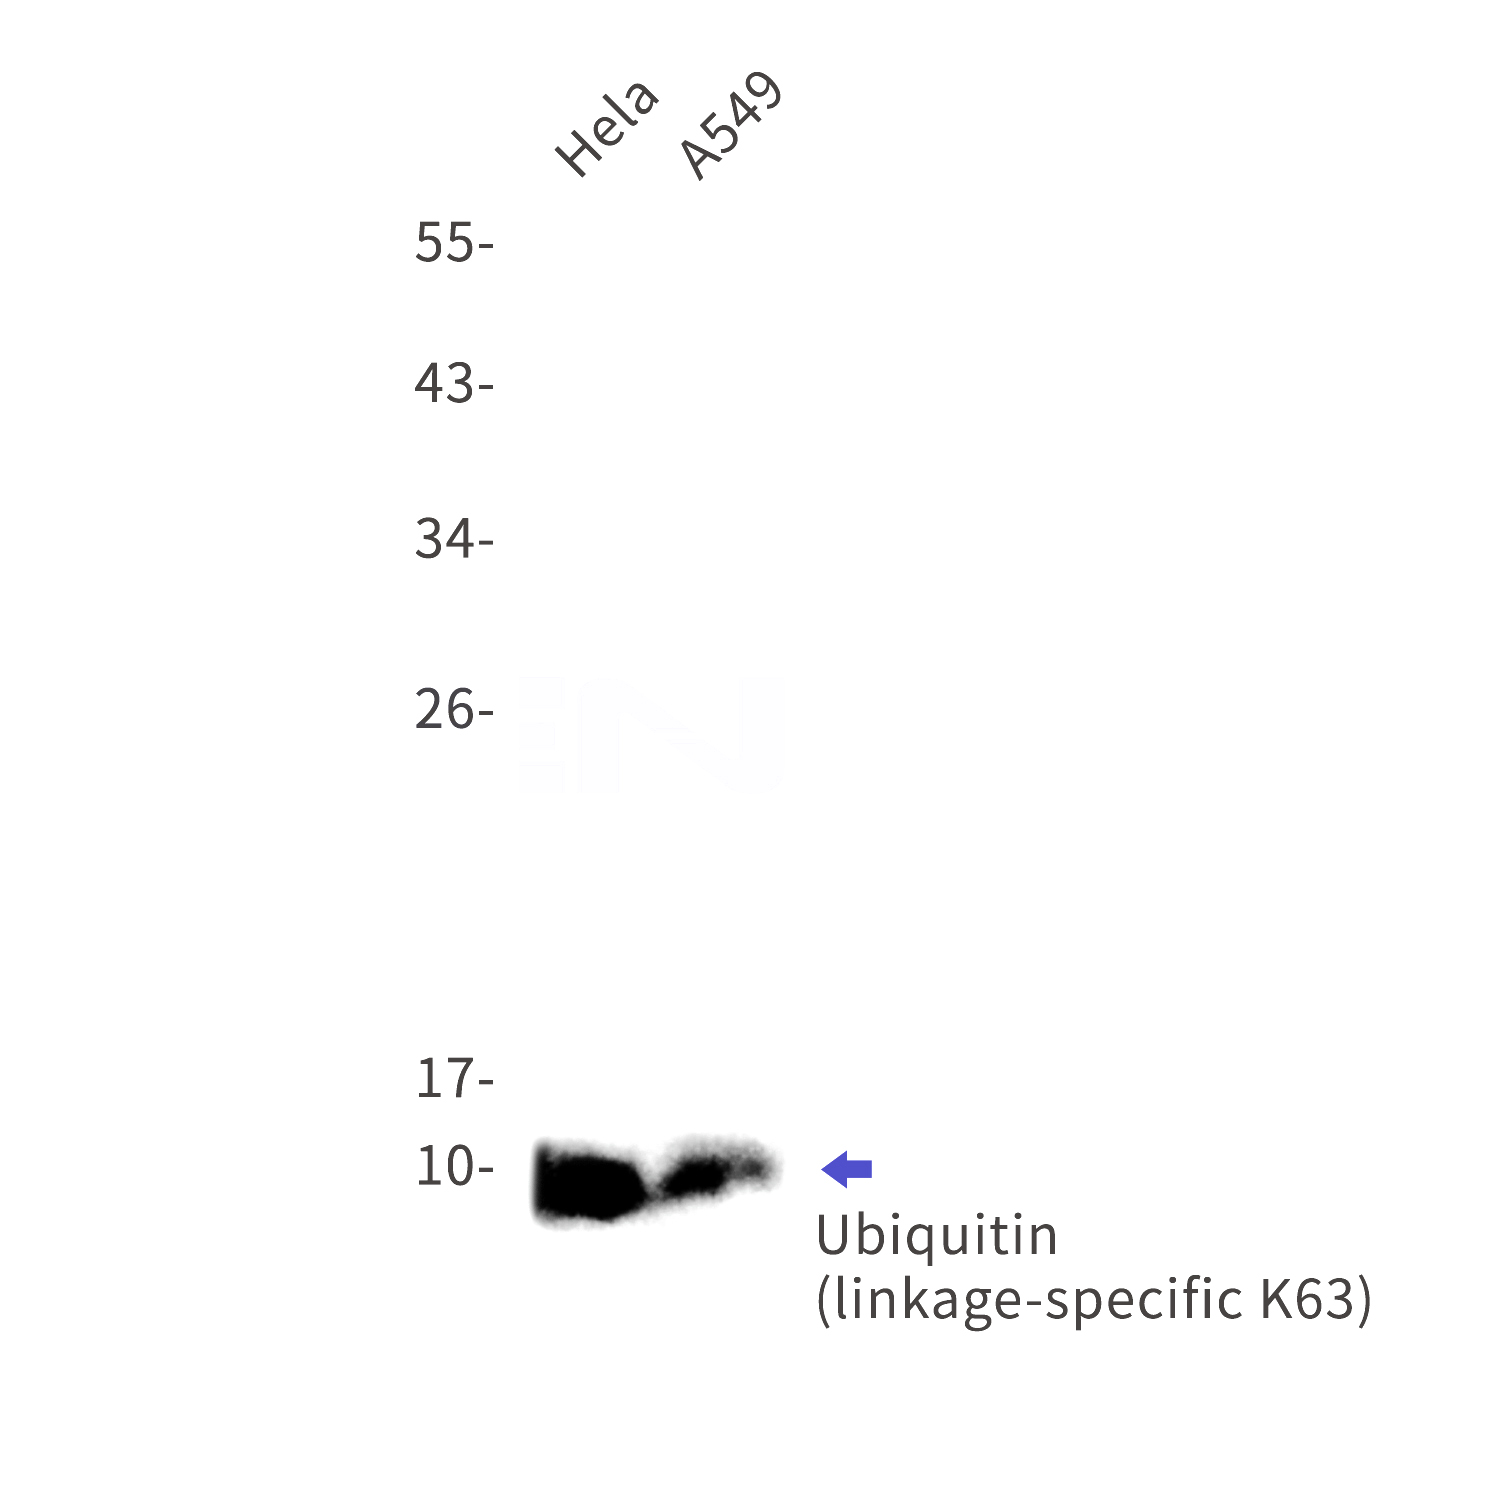 Western blot detection of Ubiquitin (linkage-specific K63) in Hela,A549 cell lysates using Ubiquitin (linkage-specific K63) Rabbit mAb(1:1000 diluted).Predicted band size:8kDa.Observed band size:8kDa.